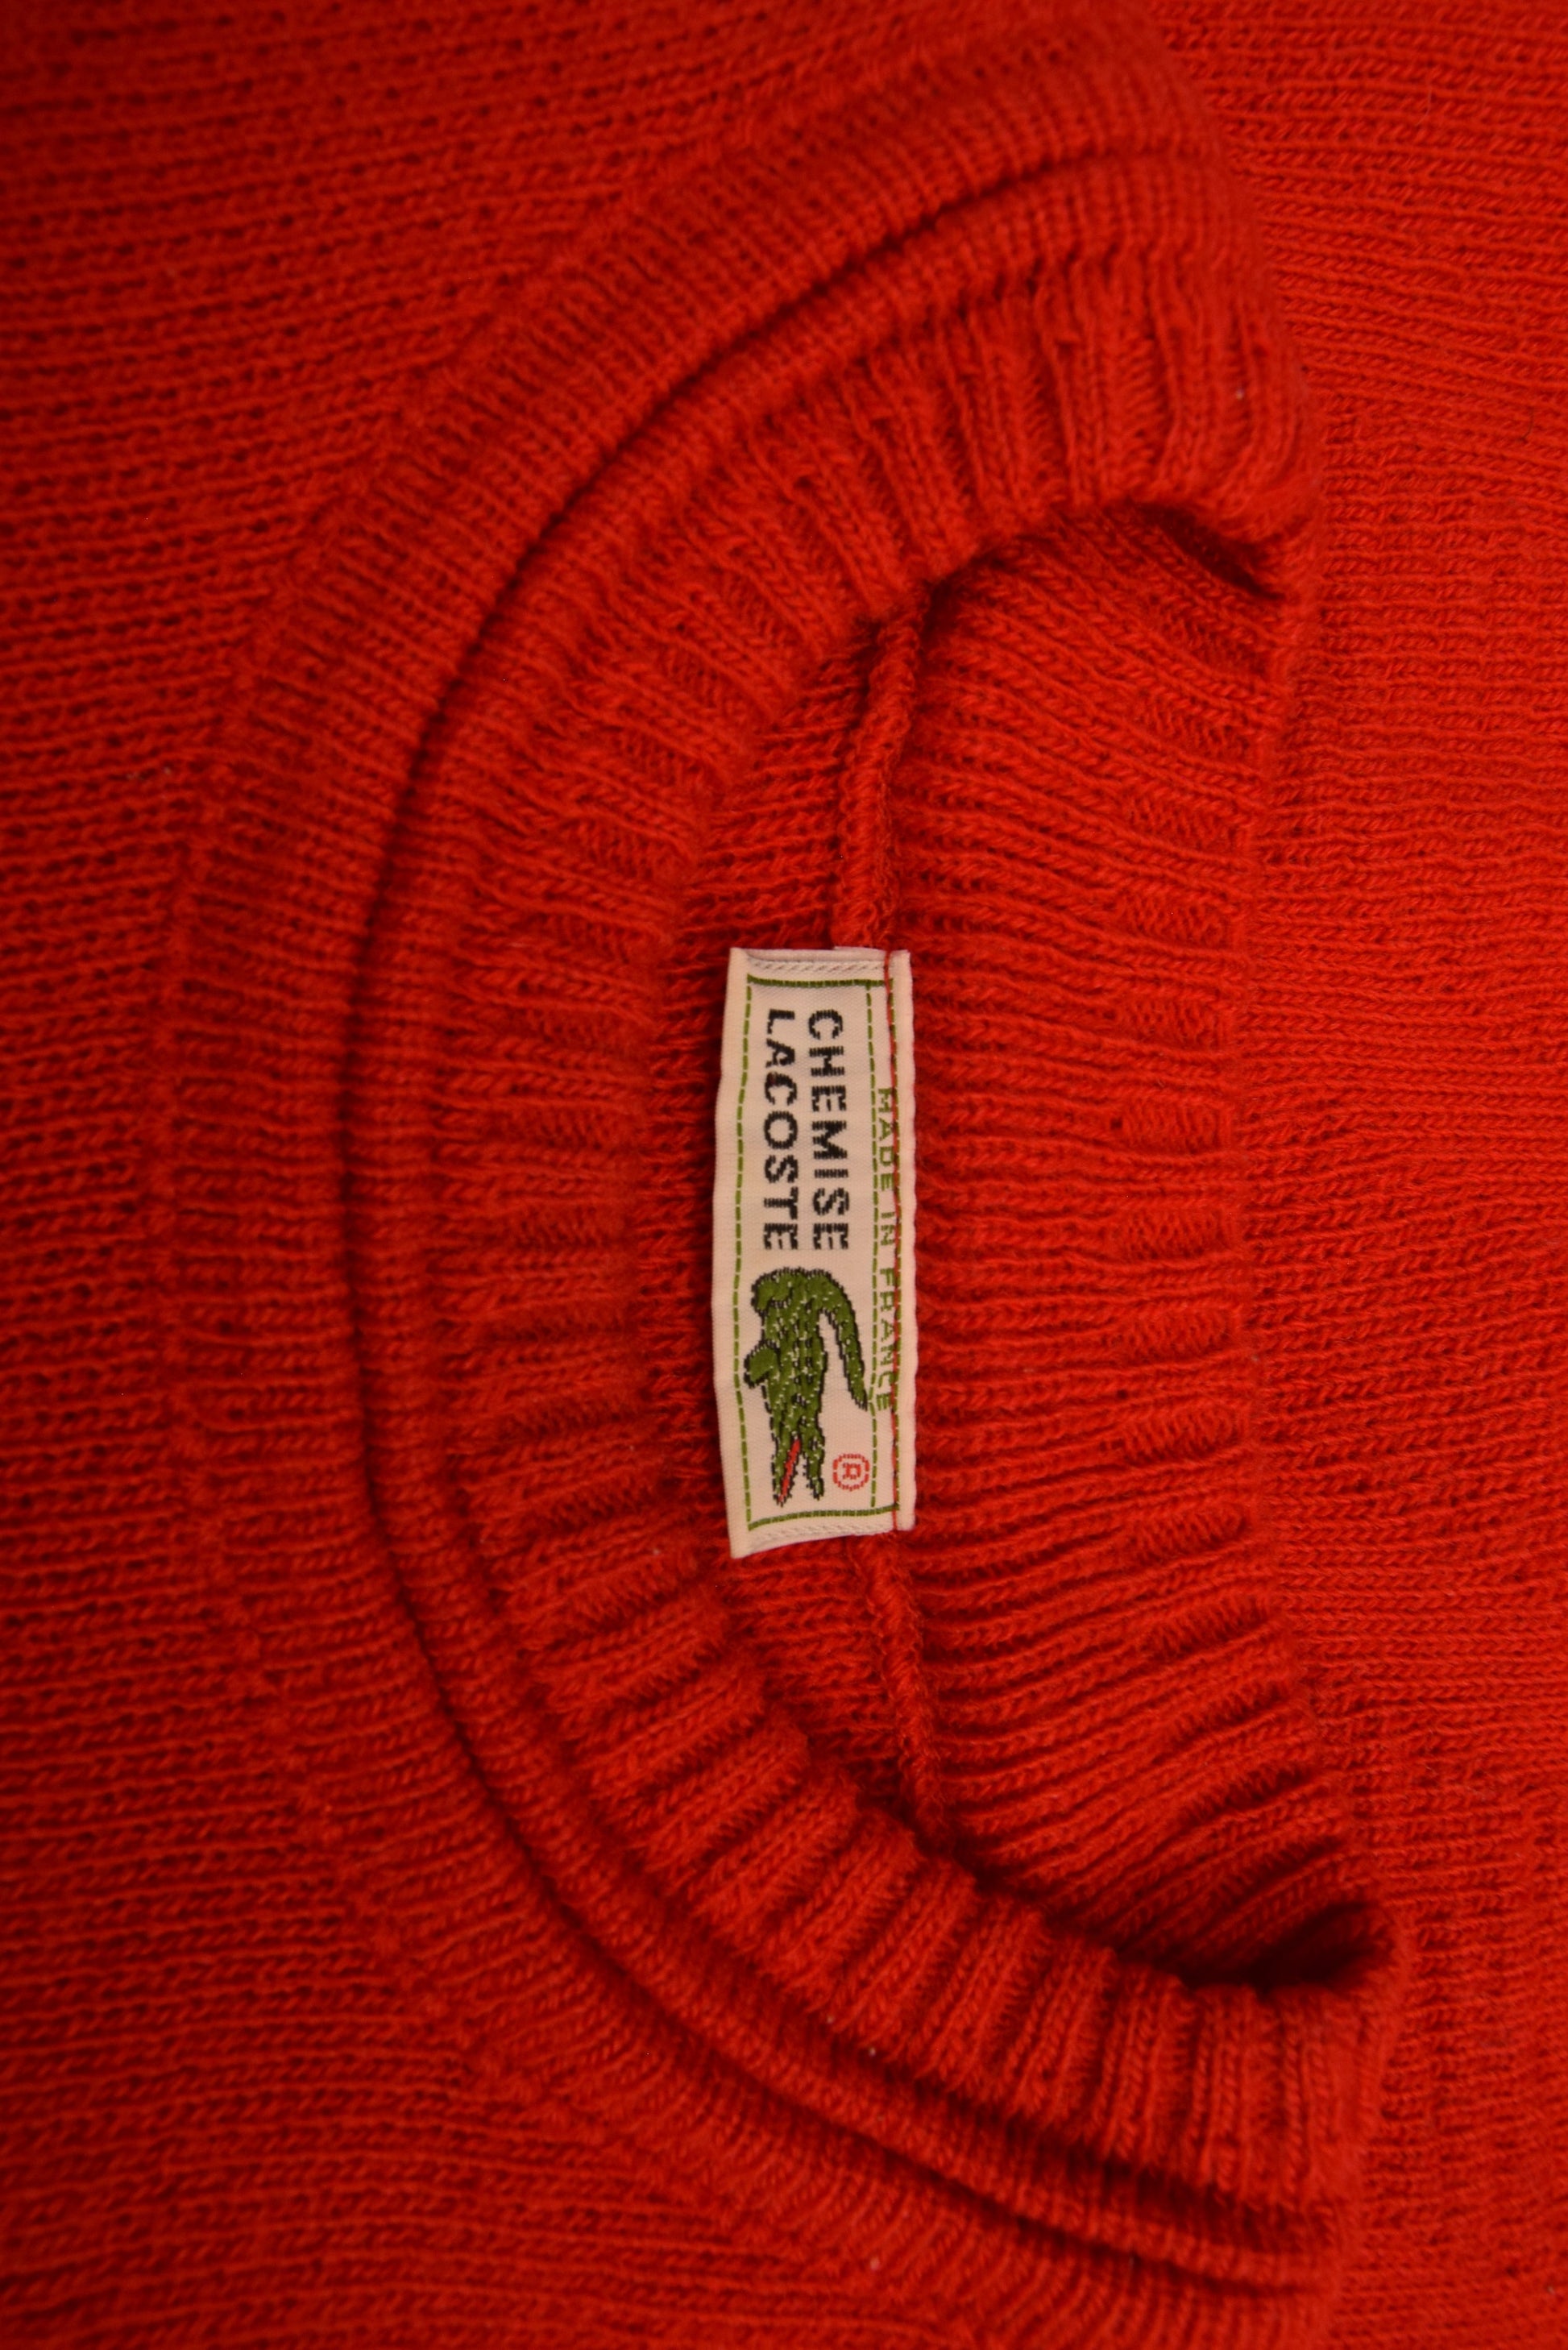 Vintage 80's Lacoste Jumper Red Wool Acrylic Made in France Chemise Size M-L